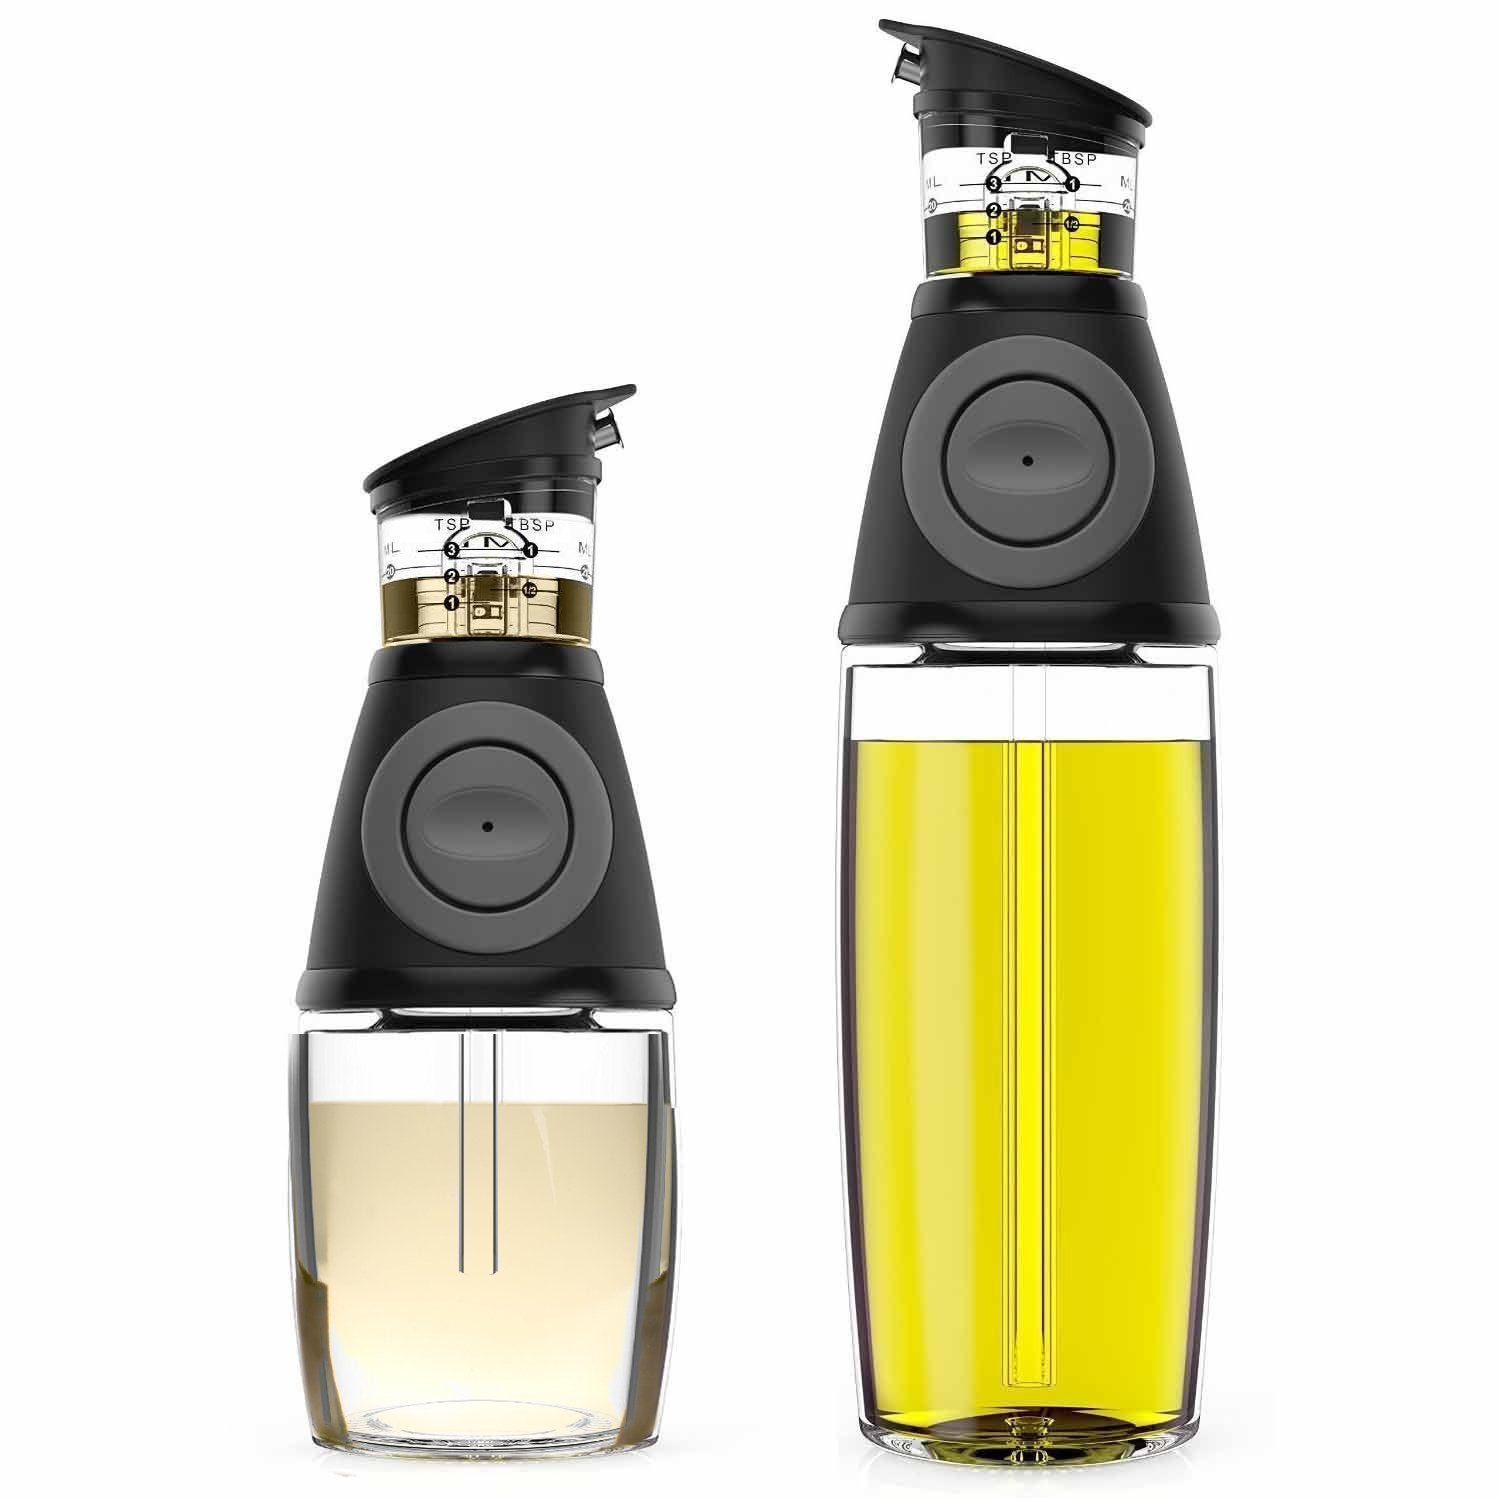 Does Vinegar Disinfect Kitchen Counters
 Oil & Vinegar Dispenser Set with Drip Free Spouts Clear